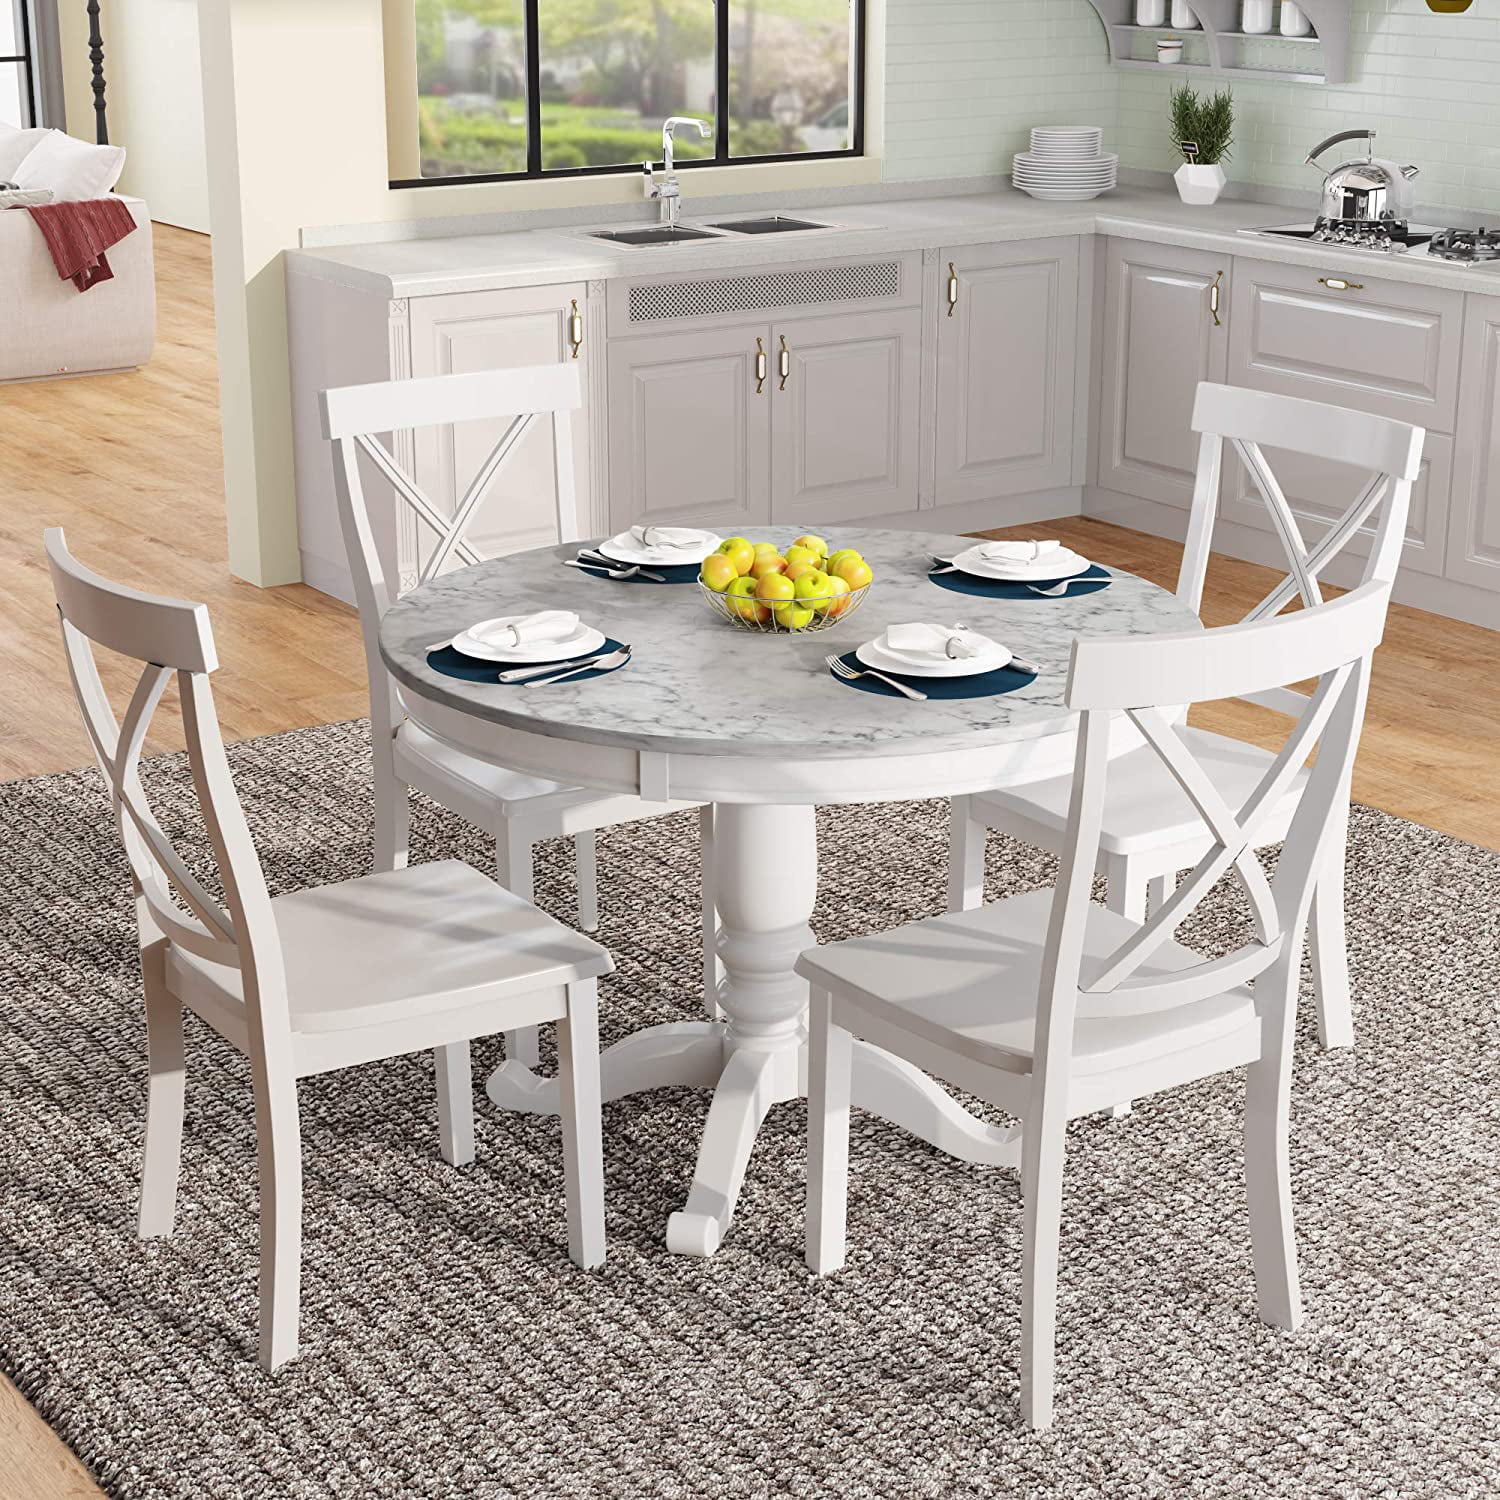 5 Piece Dining Set Wood Round Kitchen, Round Kitchen Table And Chairs Set For 4